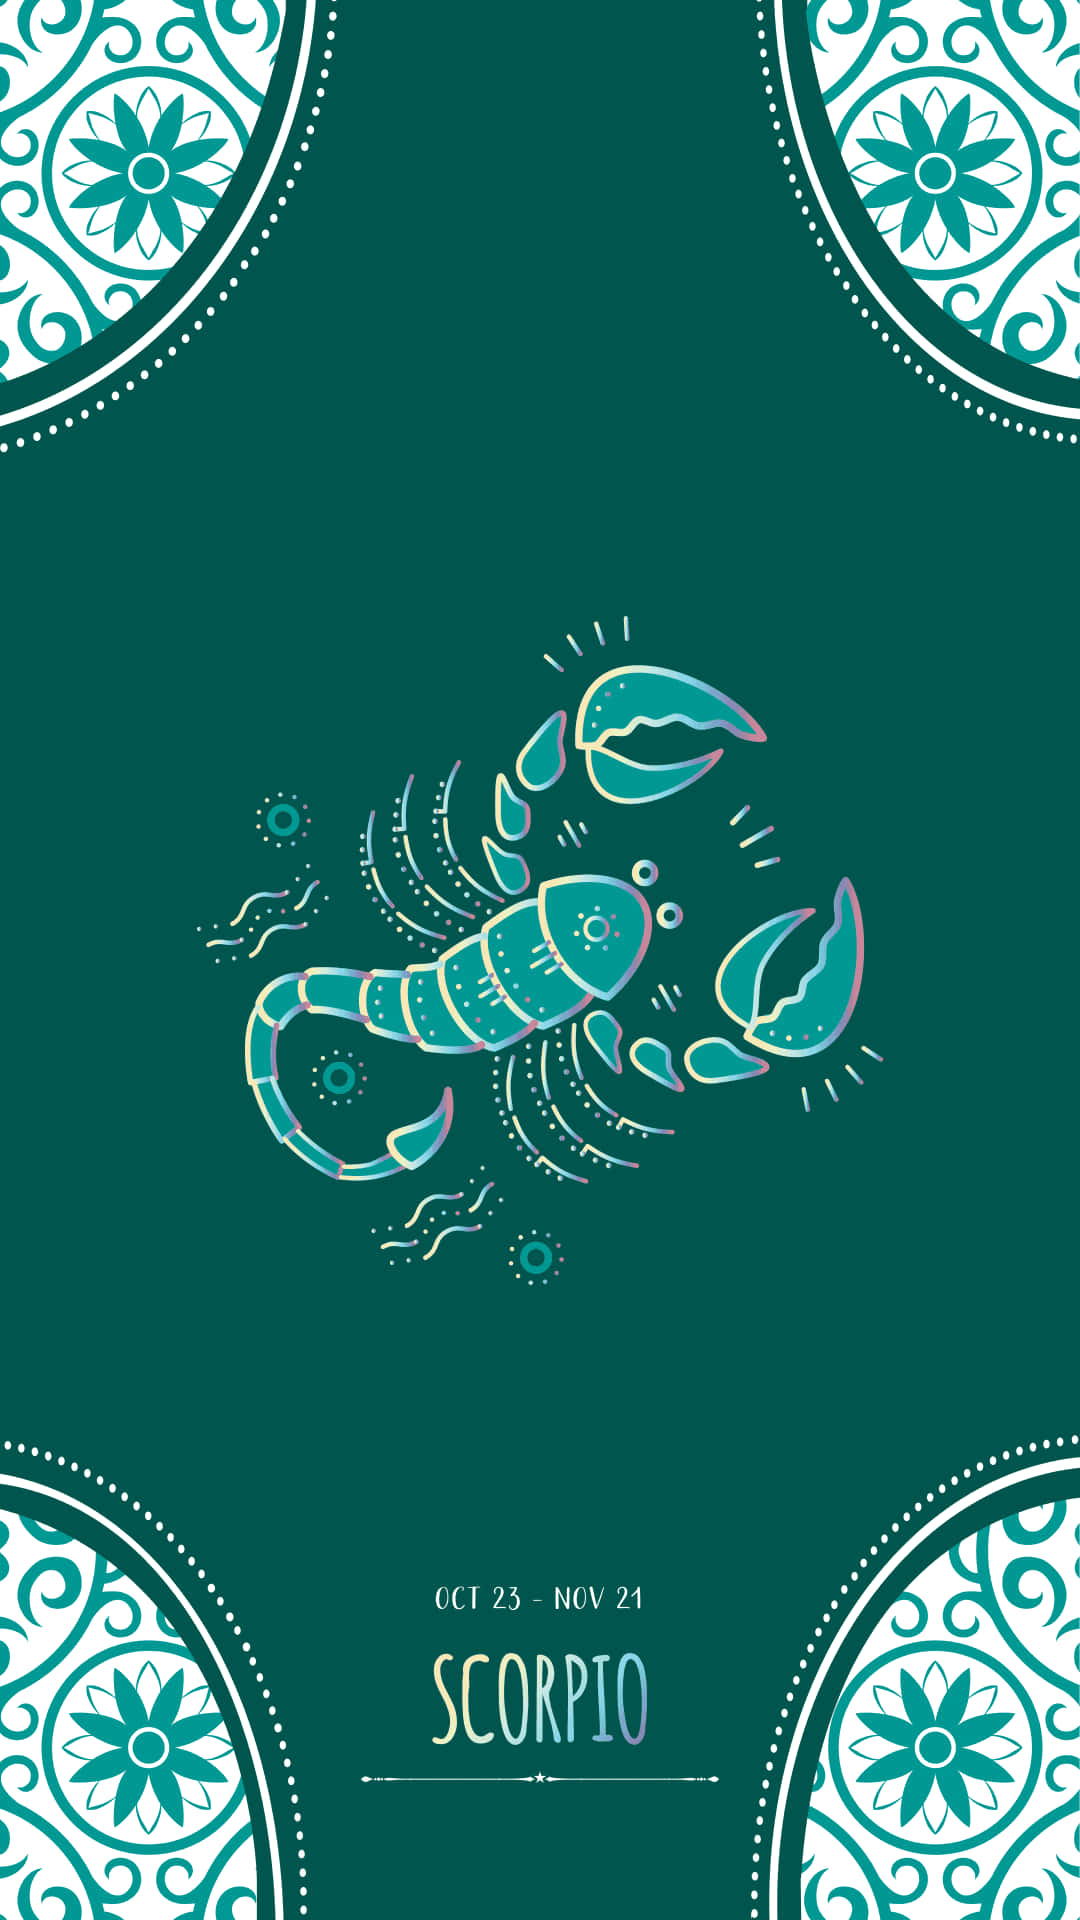 "Astrological Inspiration - The Enigmatic Scorpio on your iPhone Wallpaper" Wallpaper